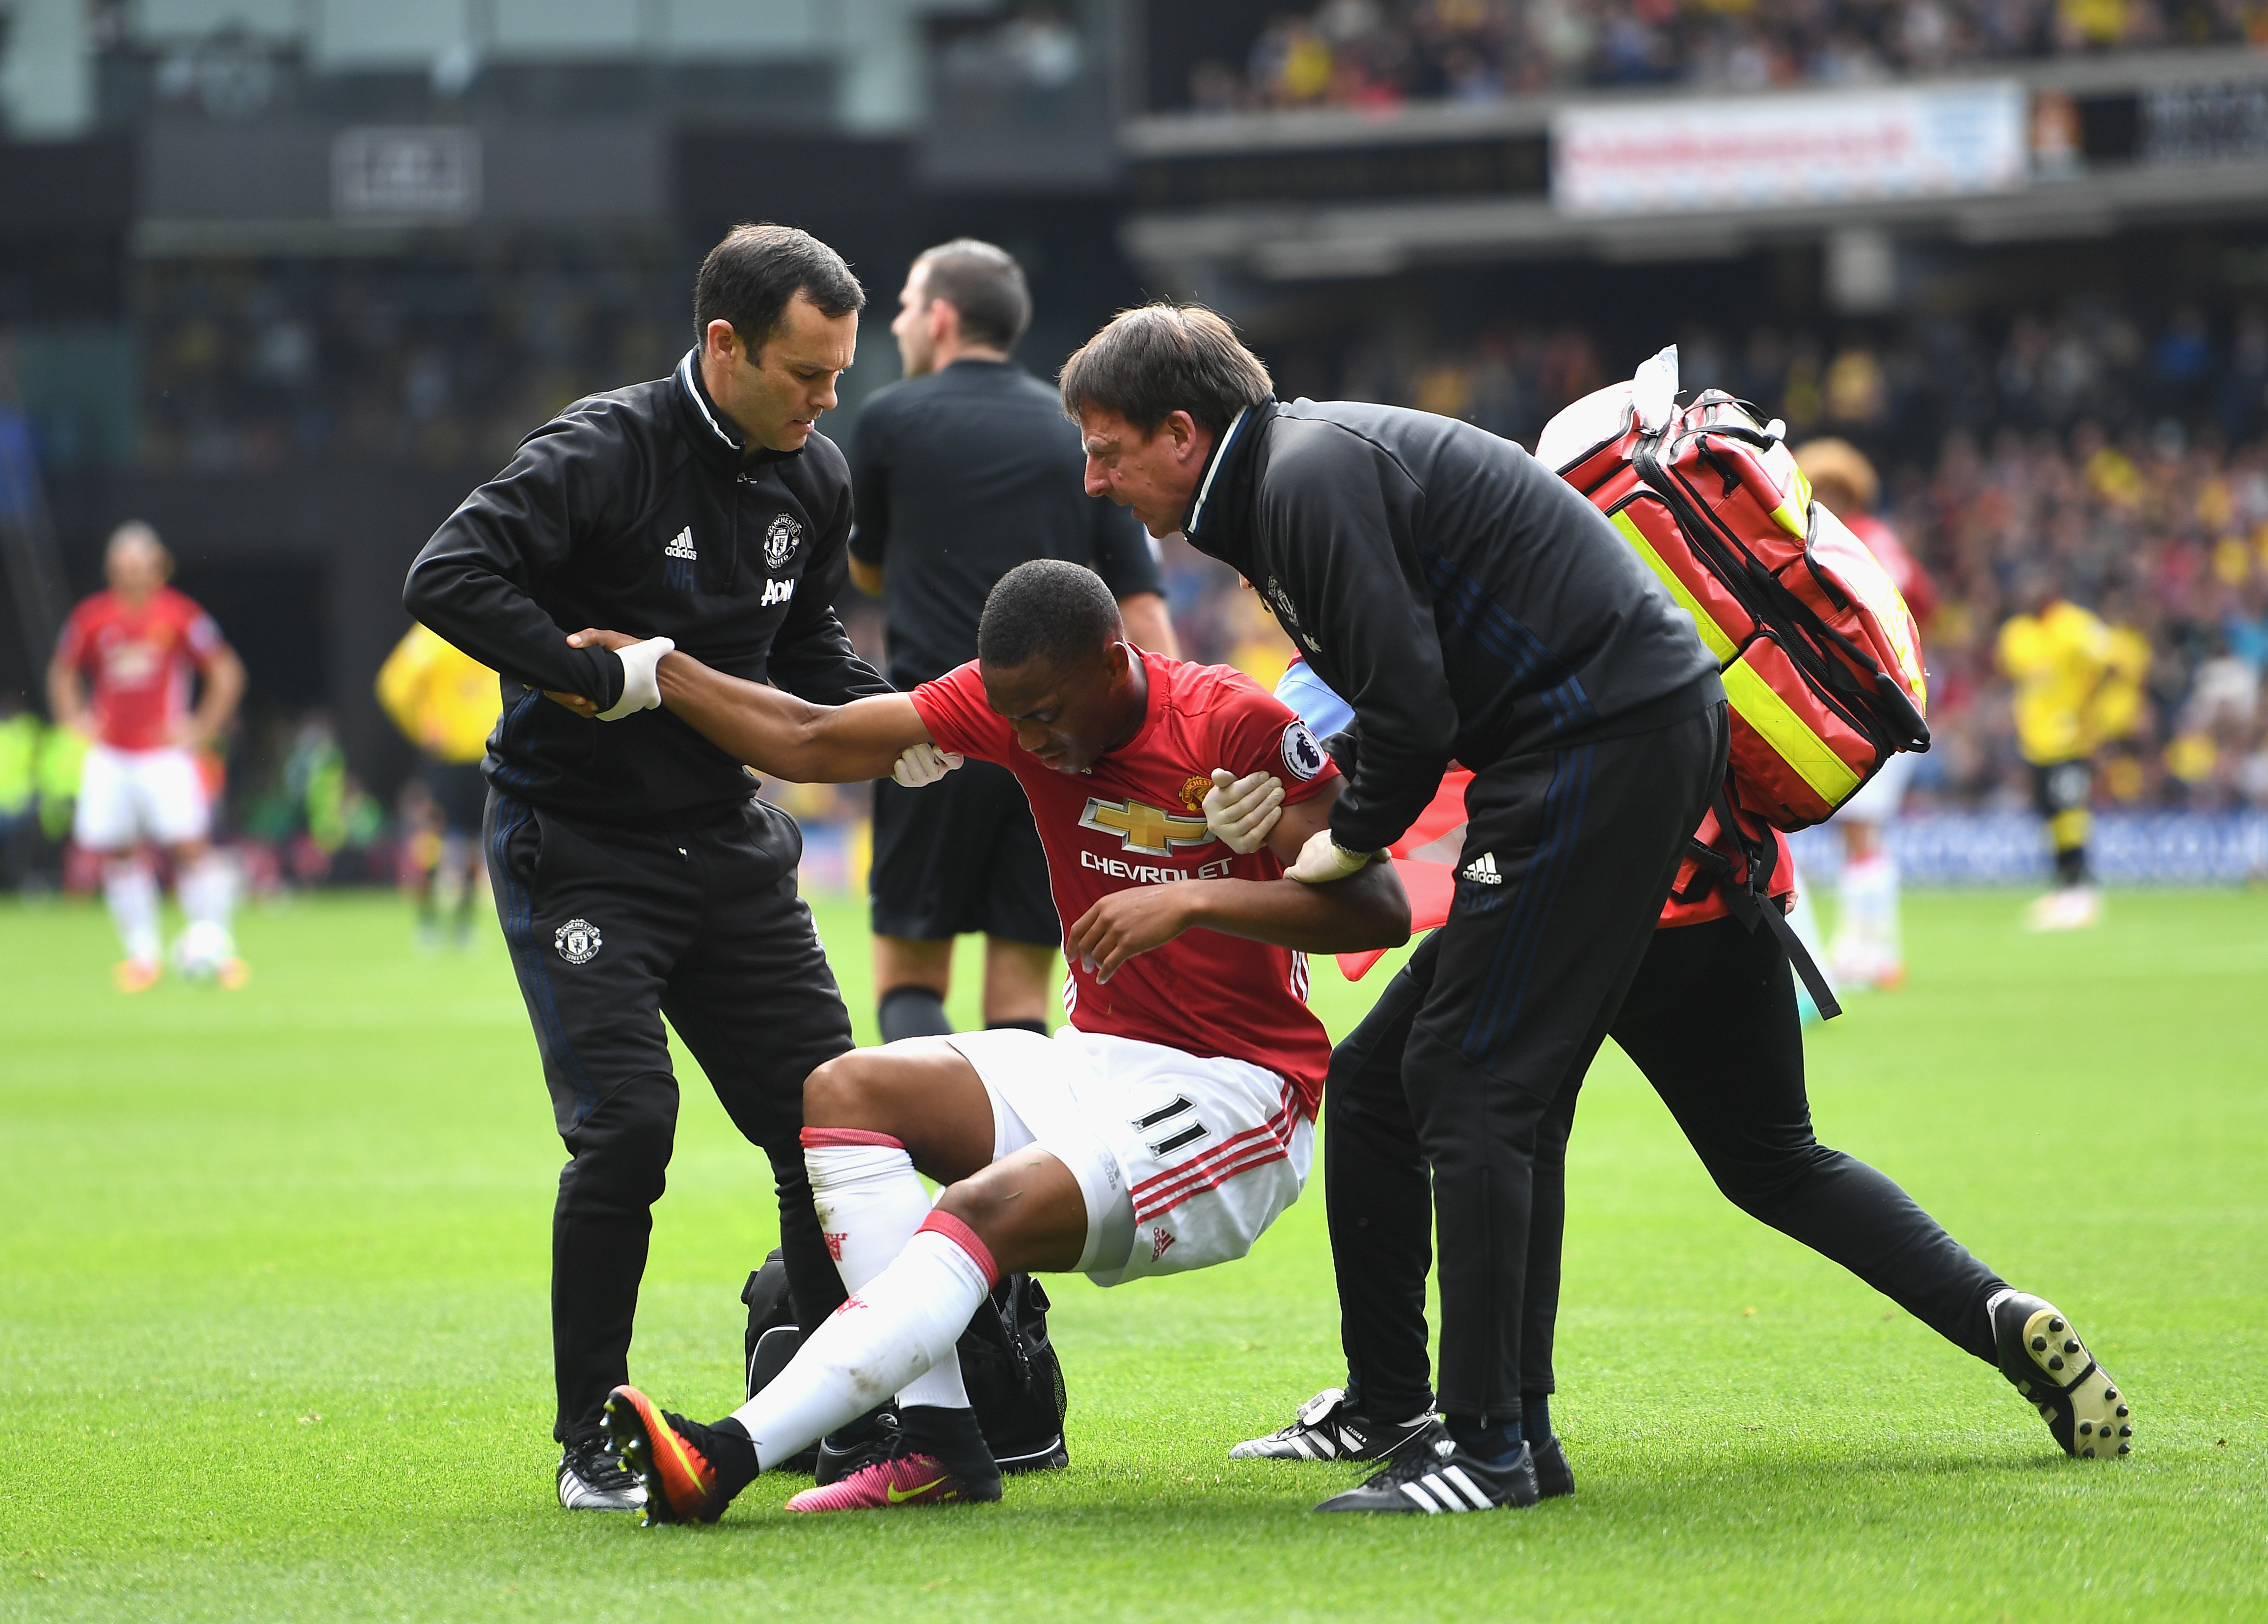 WATFORD, ENGLAND - SEPTEMBER 18: The Manchester United medical staff help Anthony Martial of Manchester United up after being injured  during the Premier League match between Watford and Manchester United at Vicarage Road on September 18, 2016 in Watford, England.  (Photo by Laurence Griffiths/Getty Images)